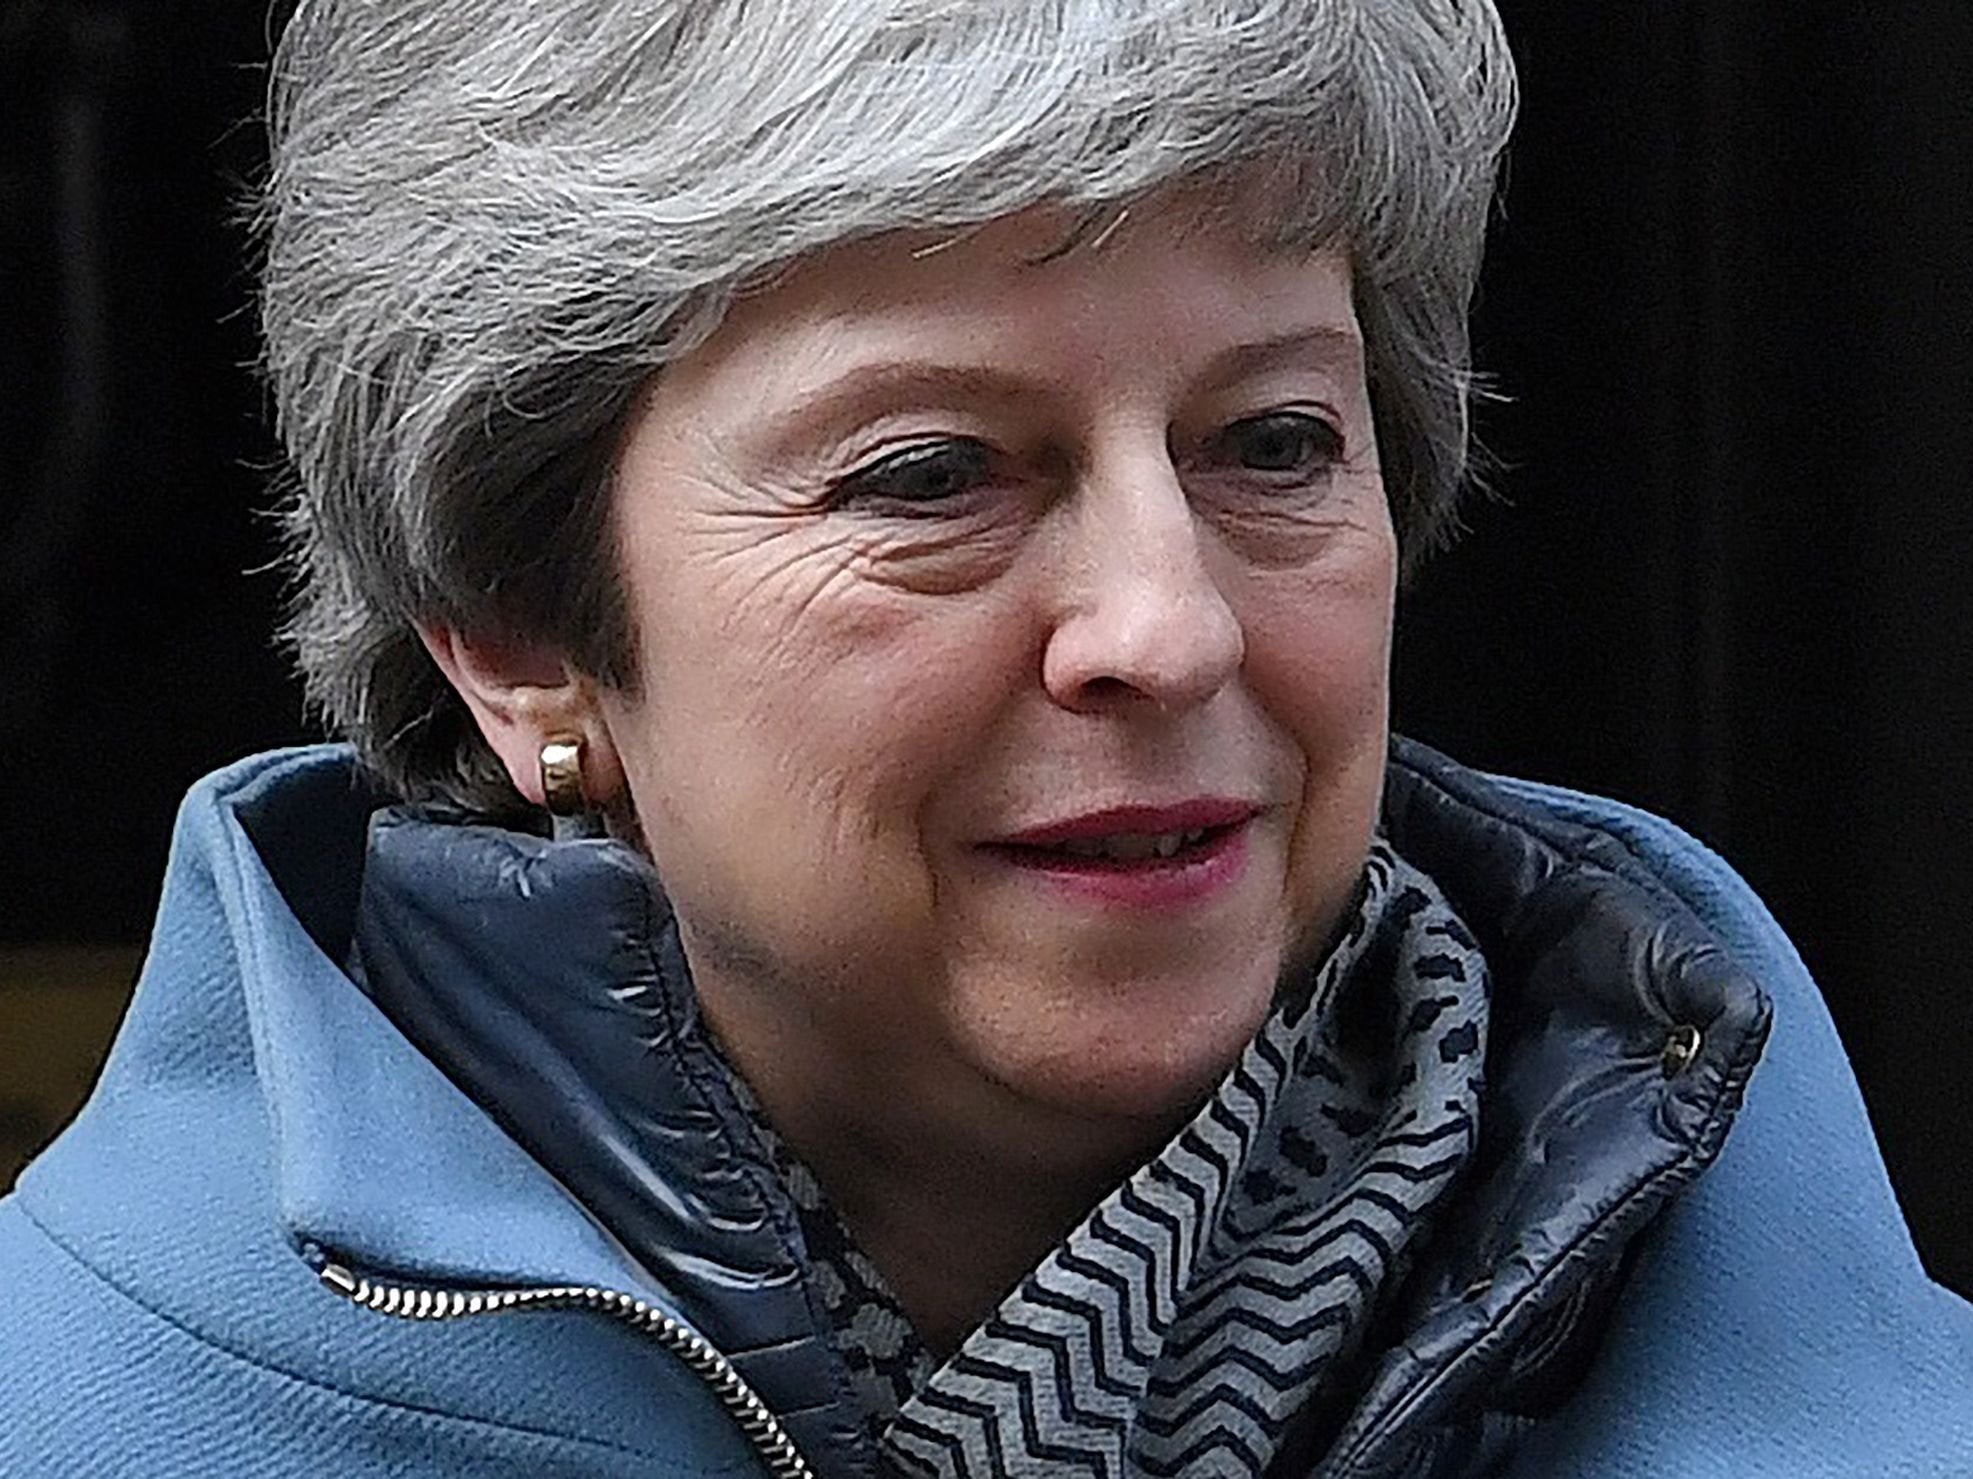 Theresa May to face Conservative MPs demanding she resigns just hours before Commons stages historic Brexit votes